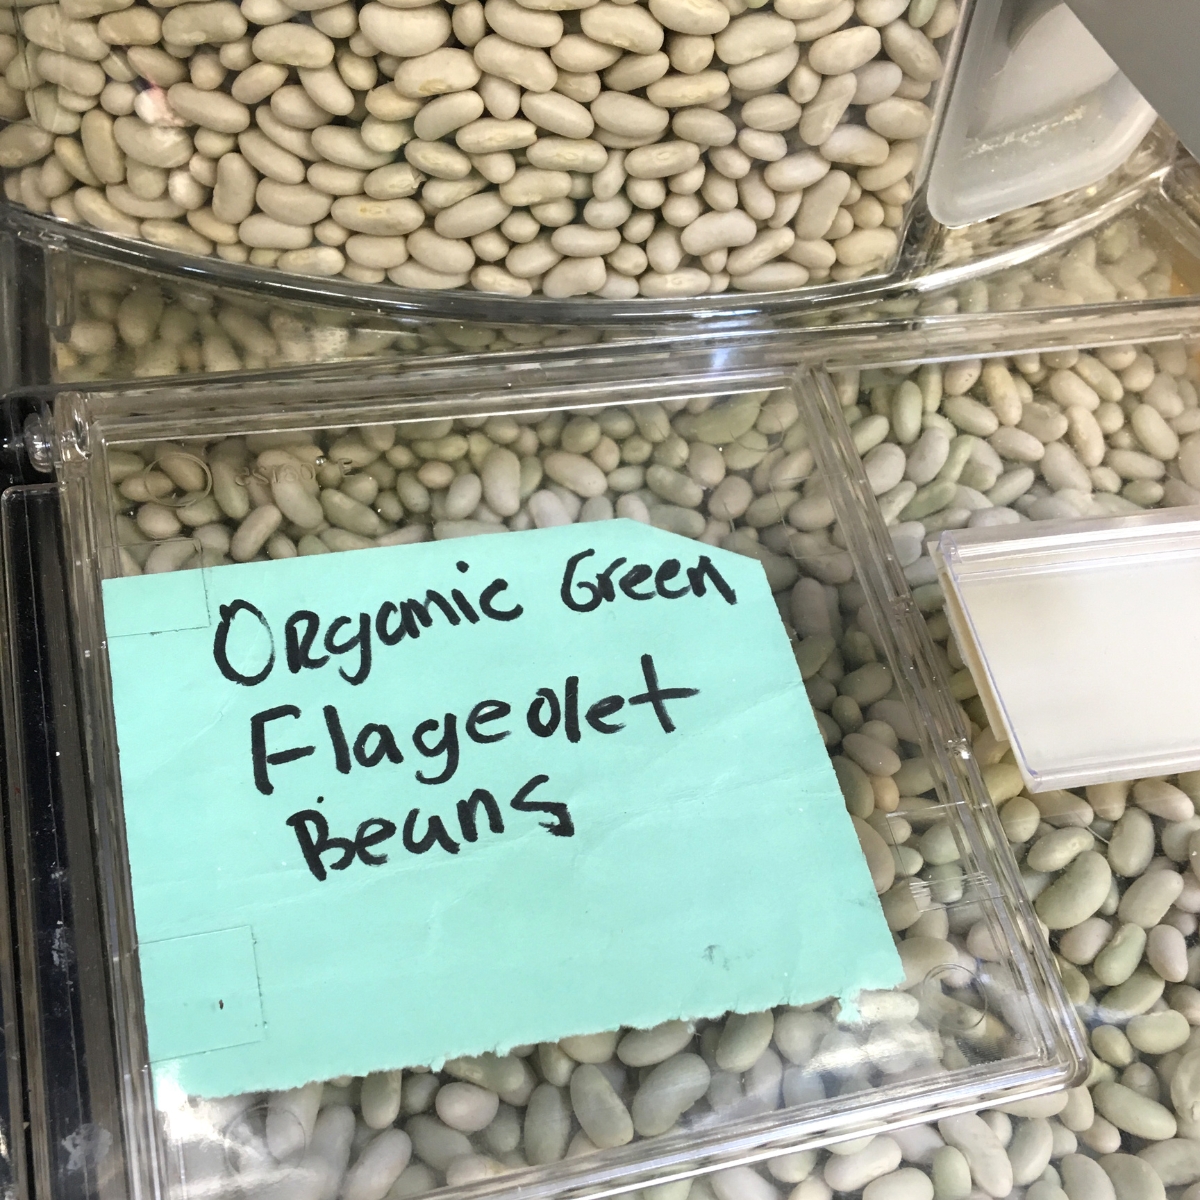 What are Flageolet Beans